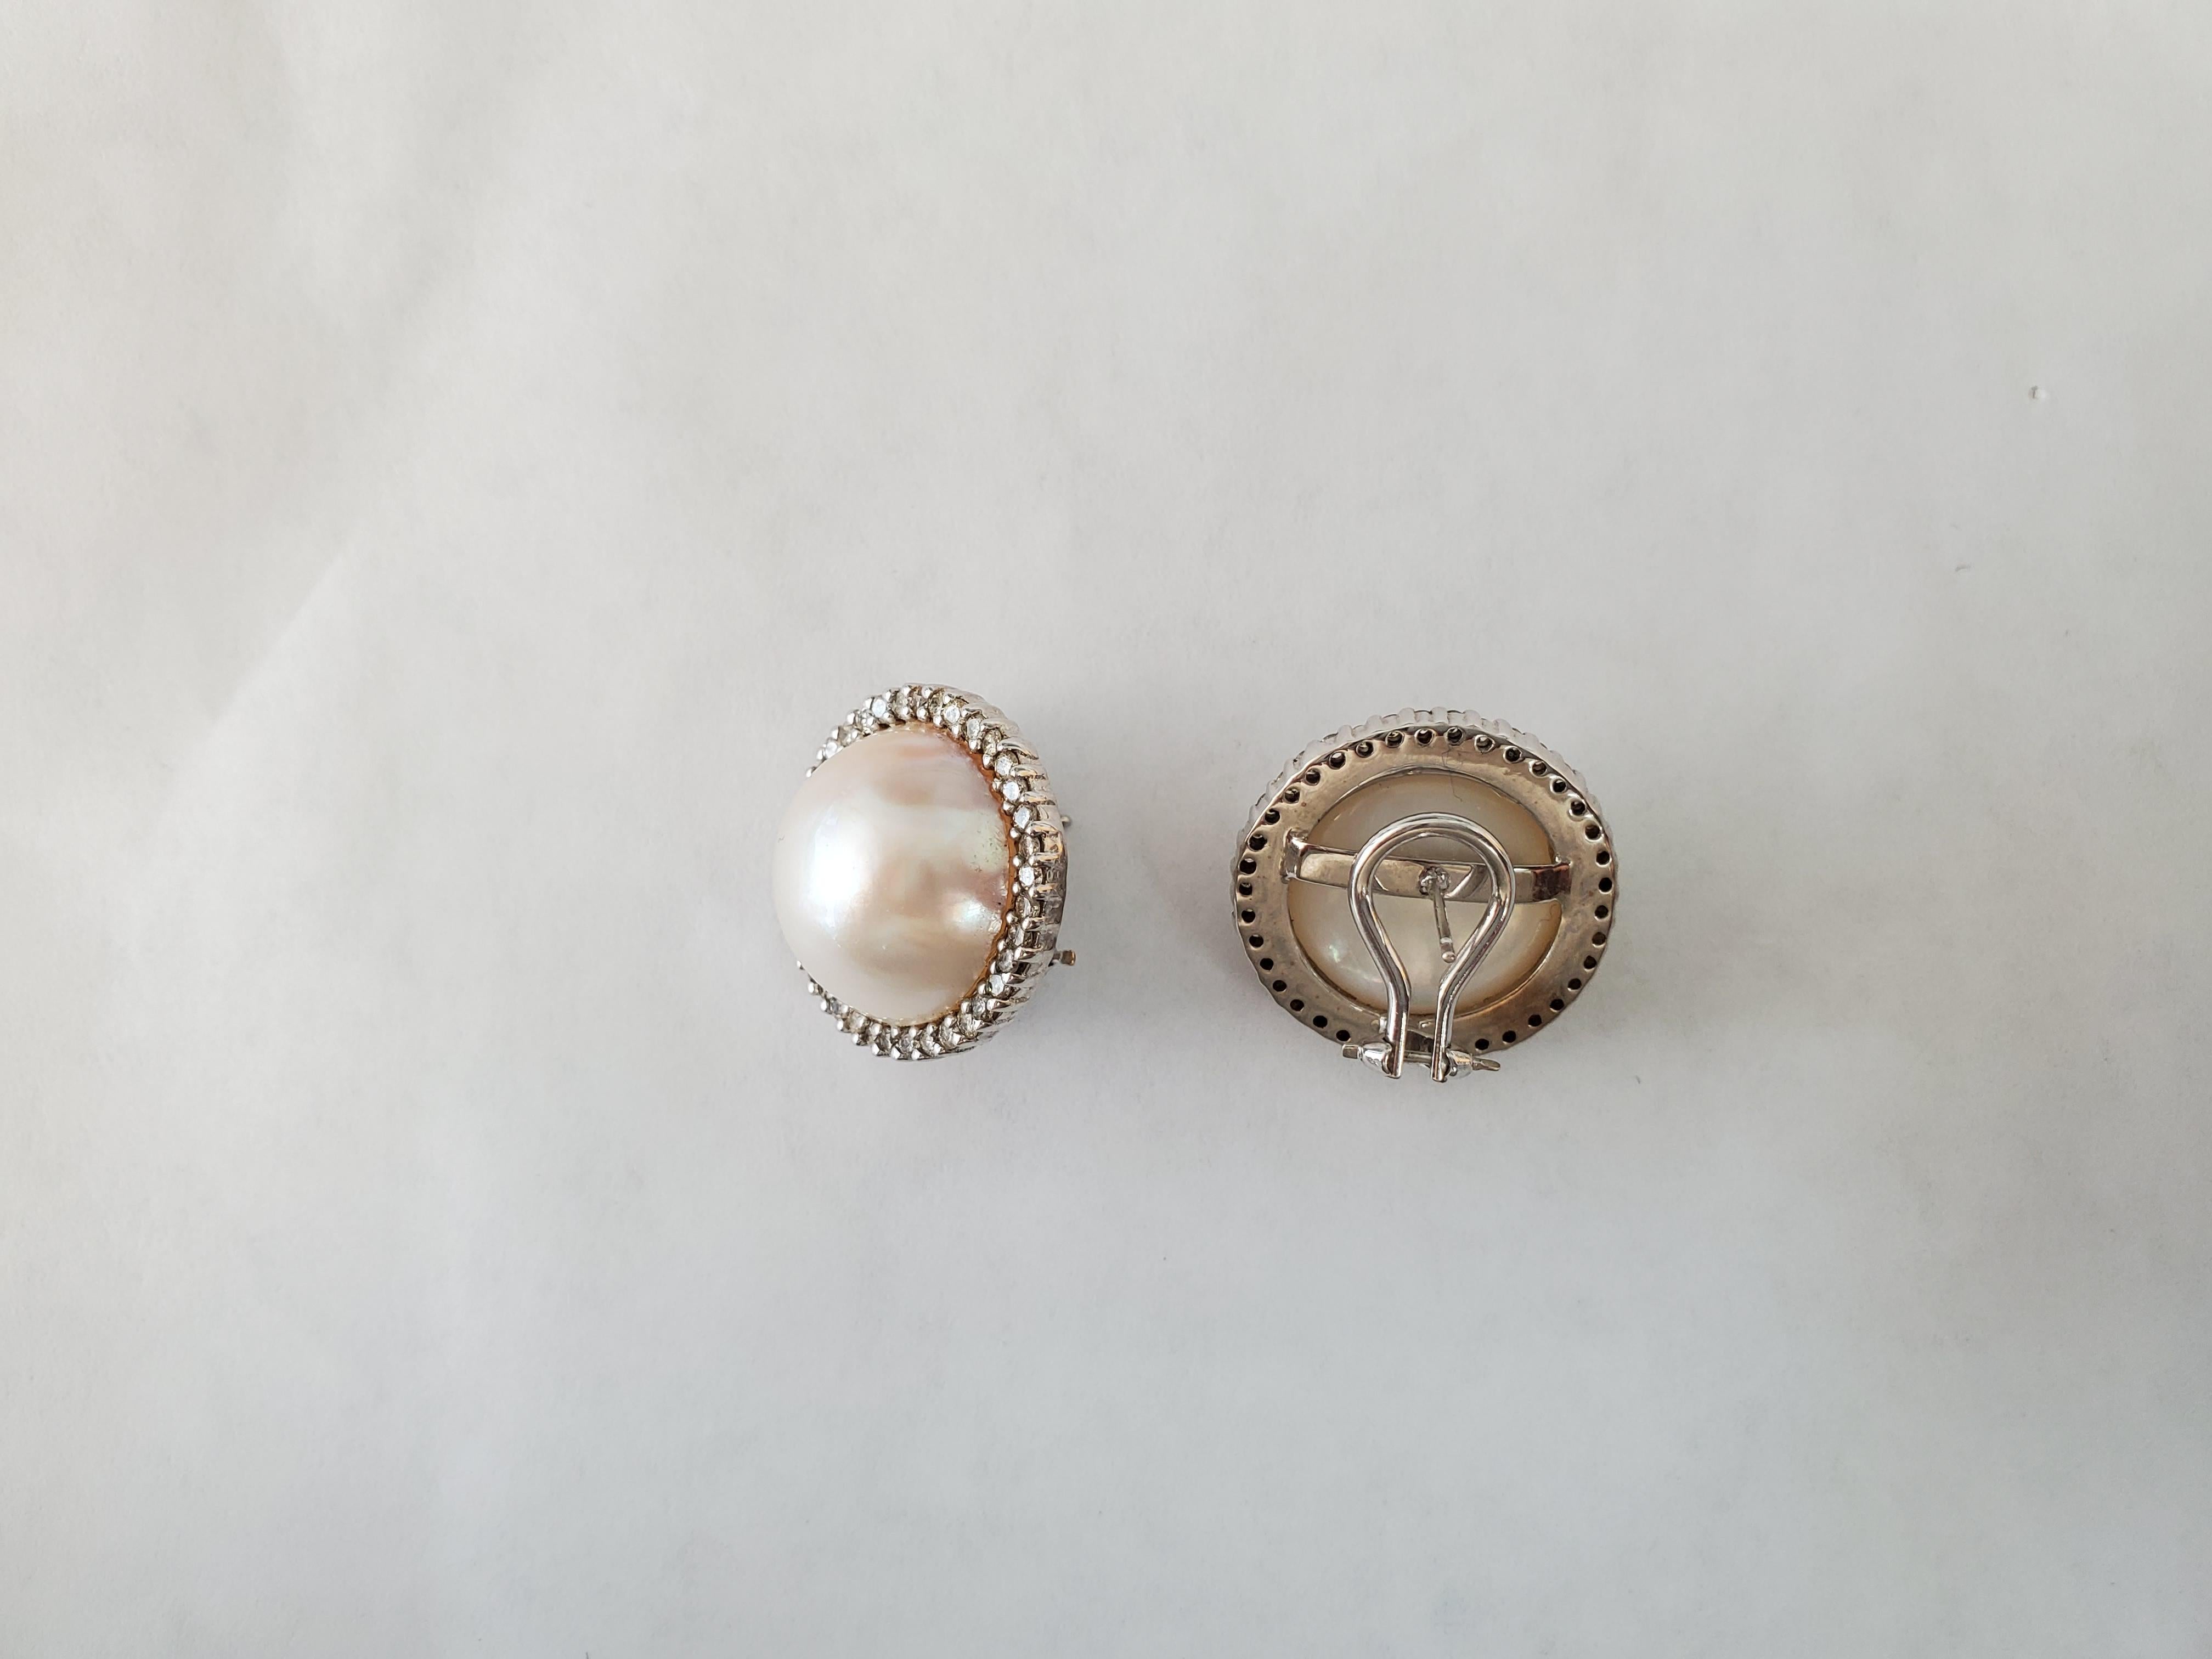 One Carat Freshwater Pearl Diamond Halo Clip on Earrings 14k White Gold In New Condition For Sale In Sugar Land, TX